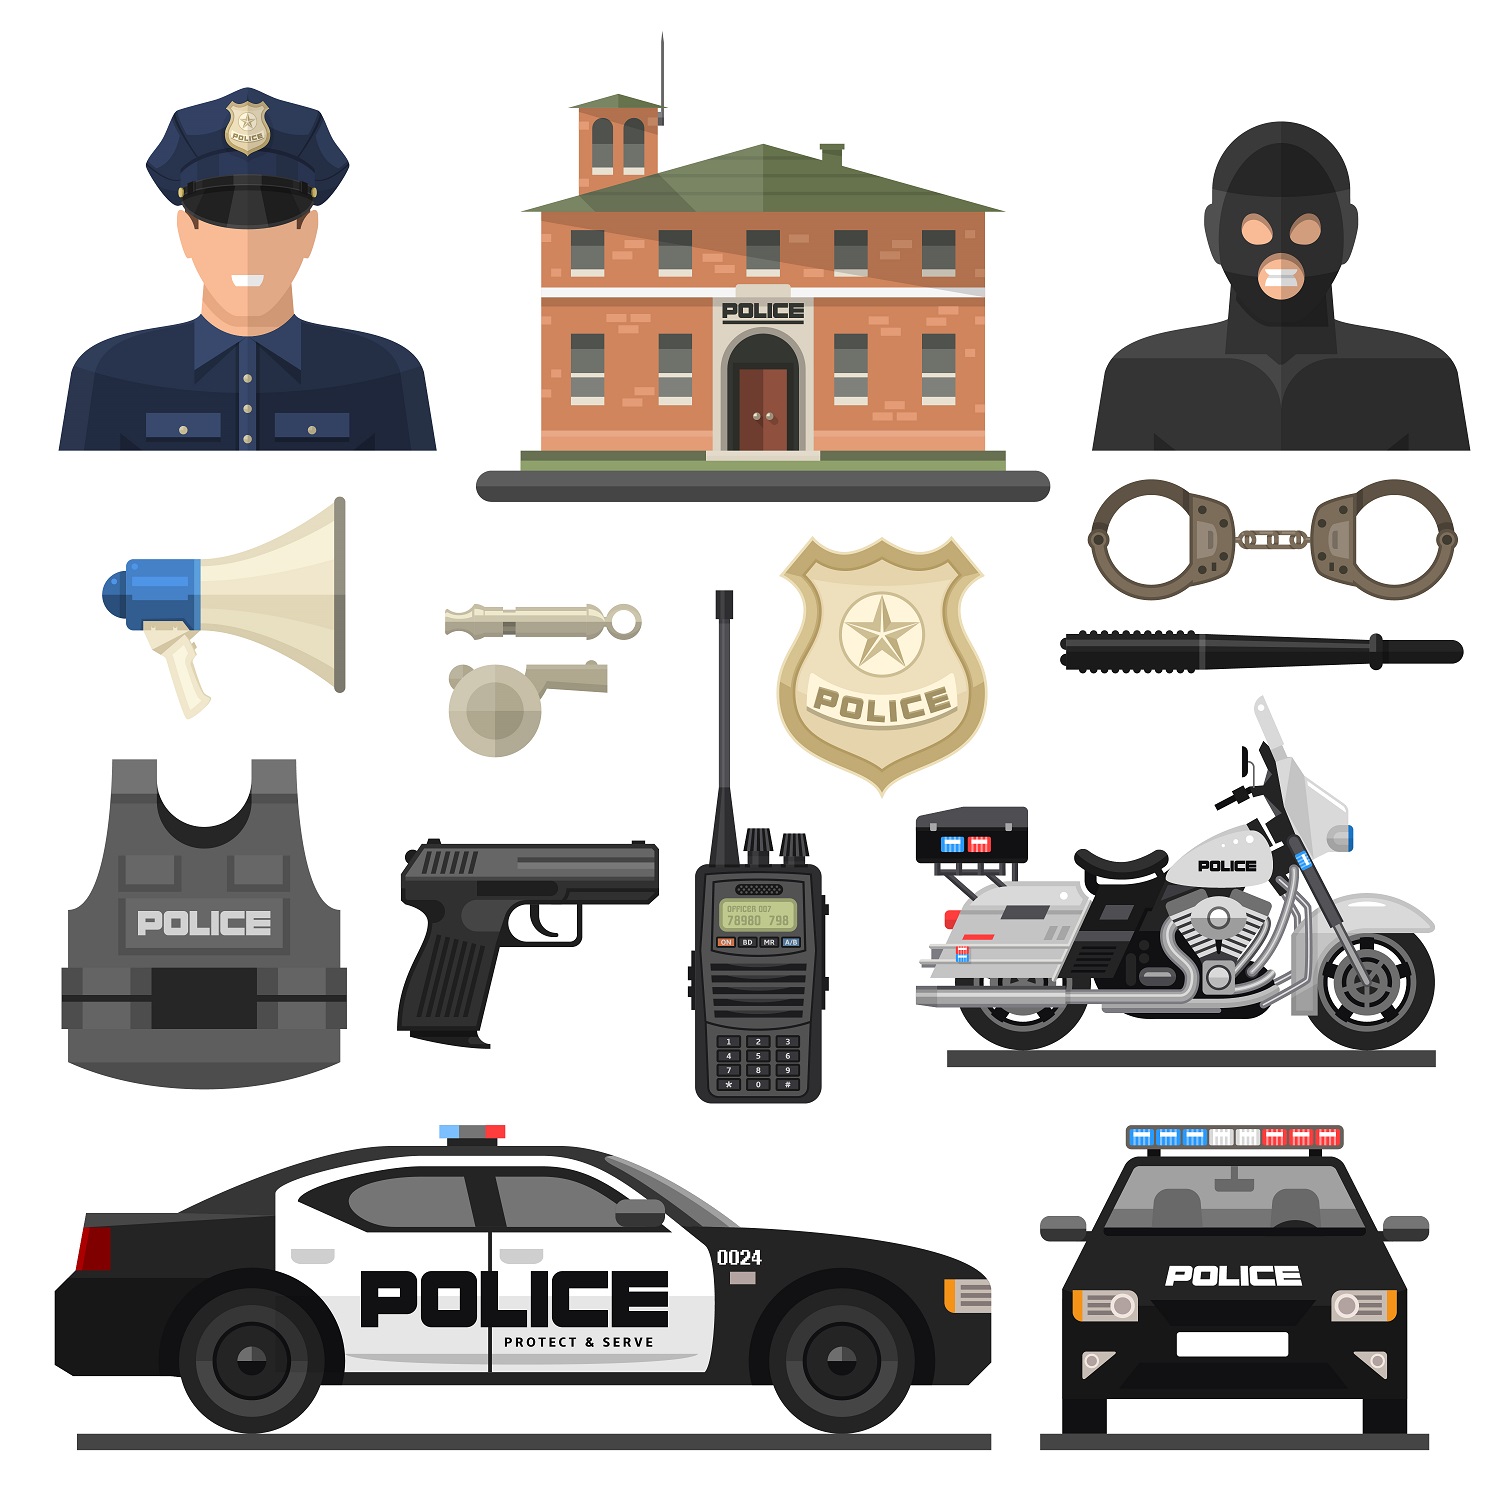 Tips to care for your law enforcement gear